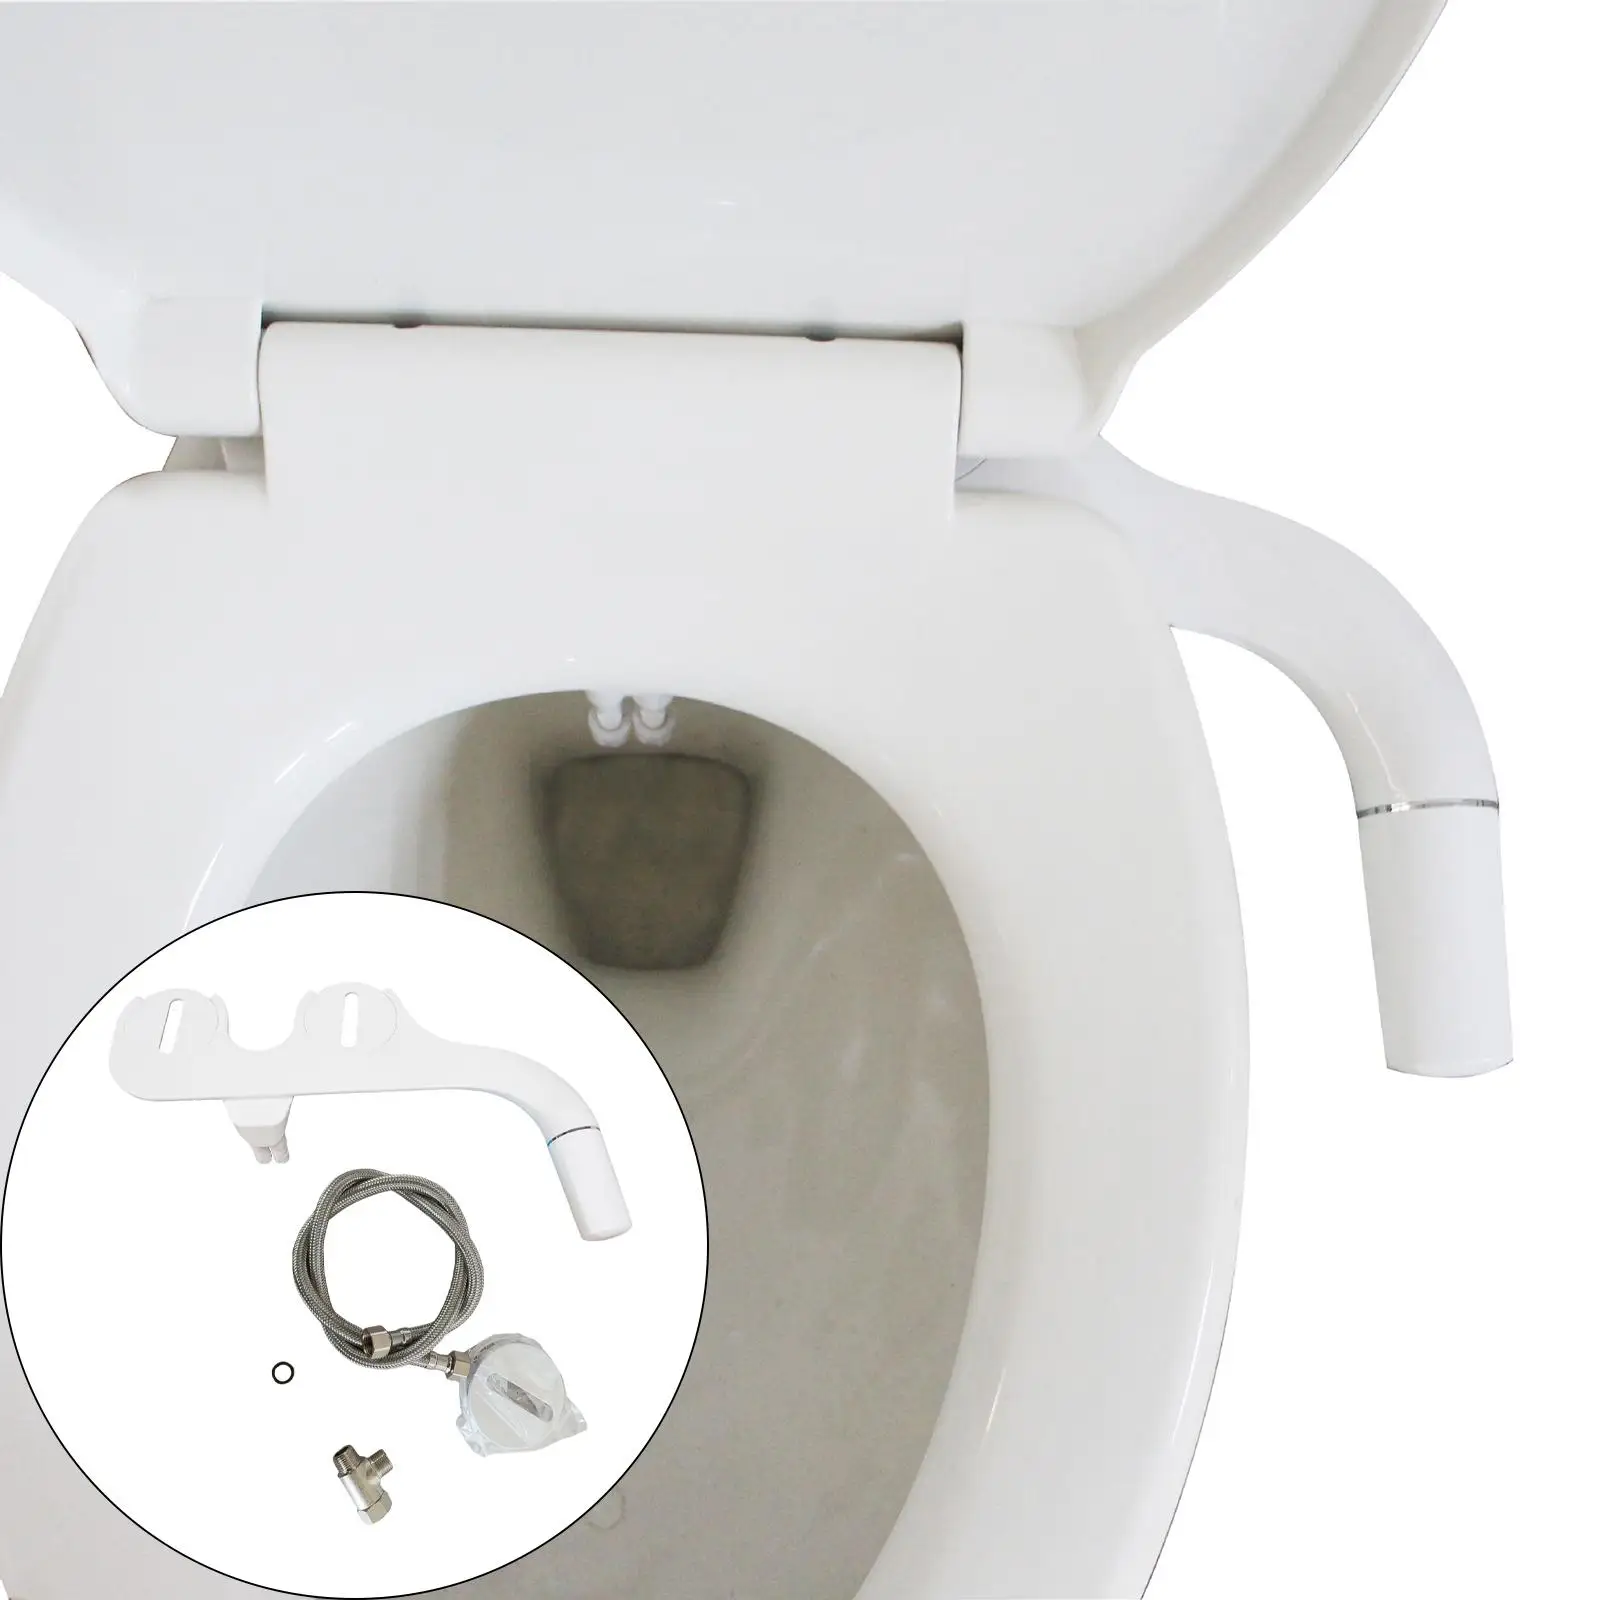 Houehold Bidet Toilet Seat Attachment Mechanical   Water Sprayer Washer Self Cleaning Nozzle Clean Sprayer for Toilet